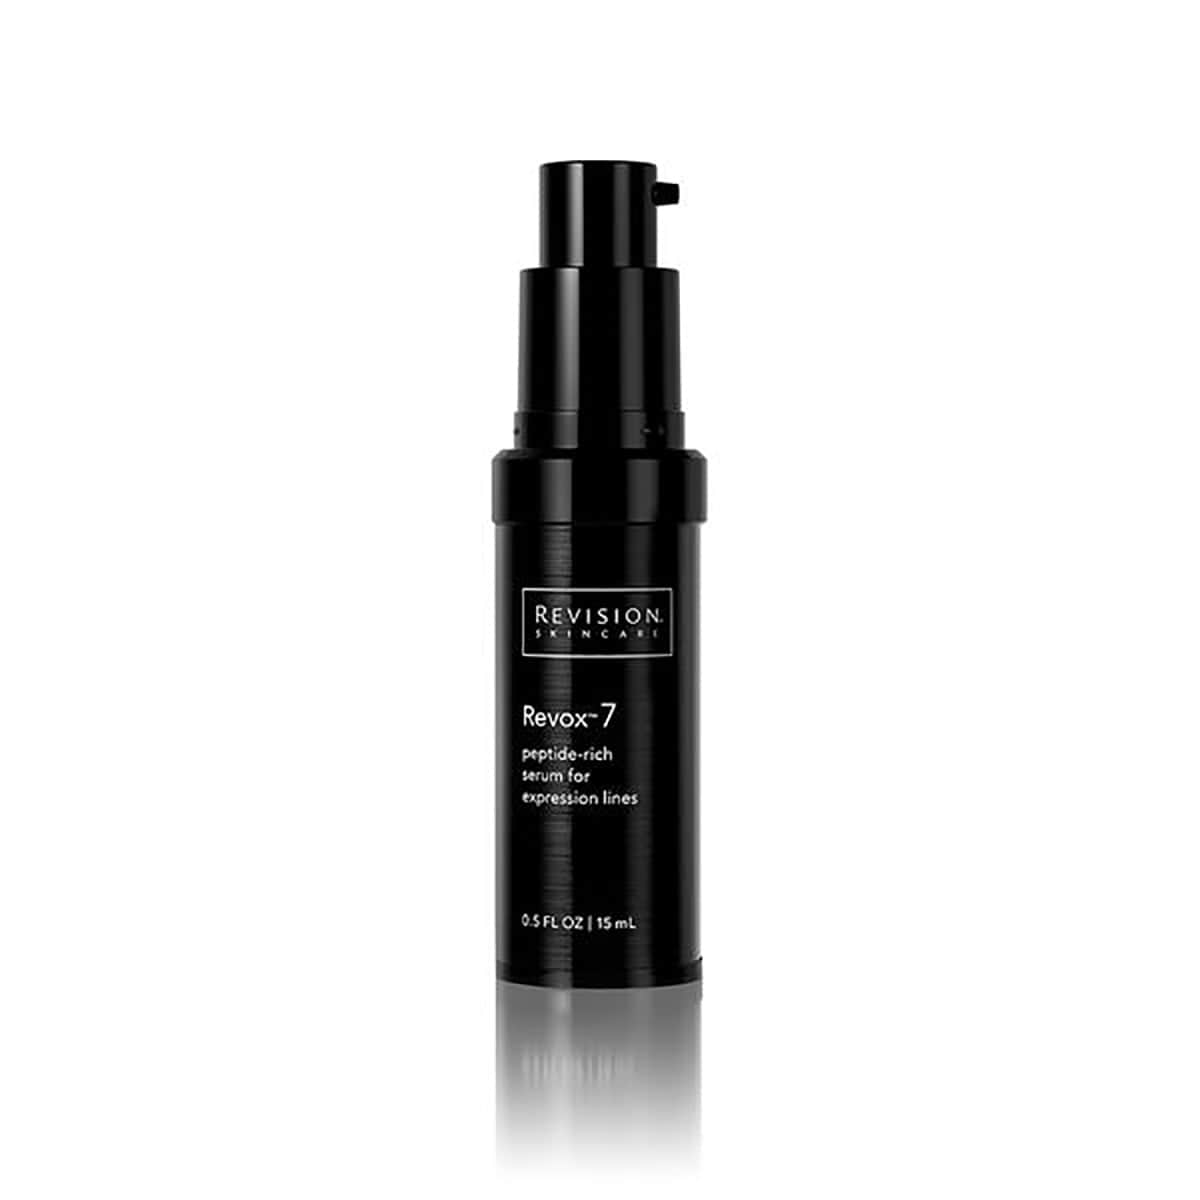 Revox 7- peptide-rich serum for expression lines. Pump Front